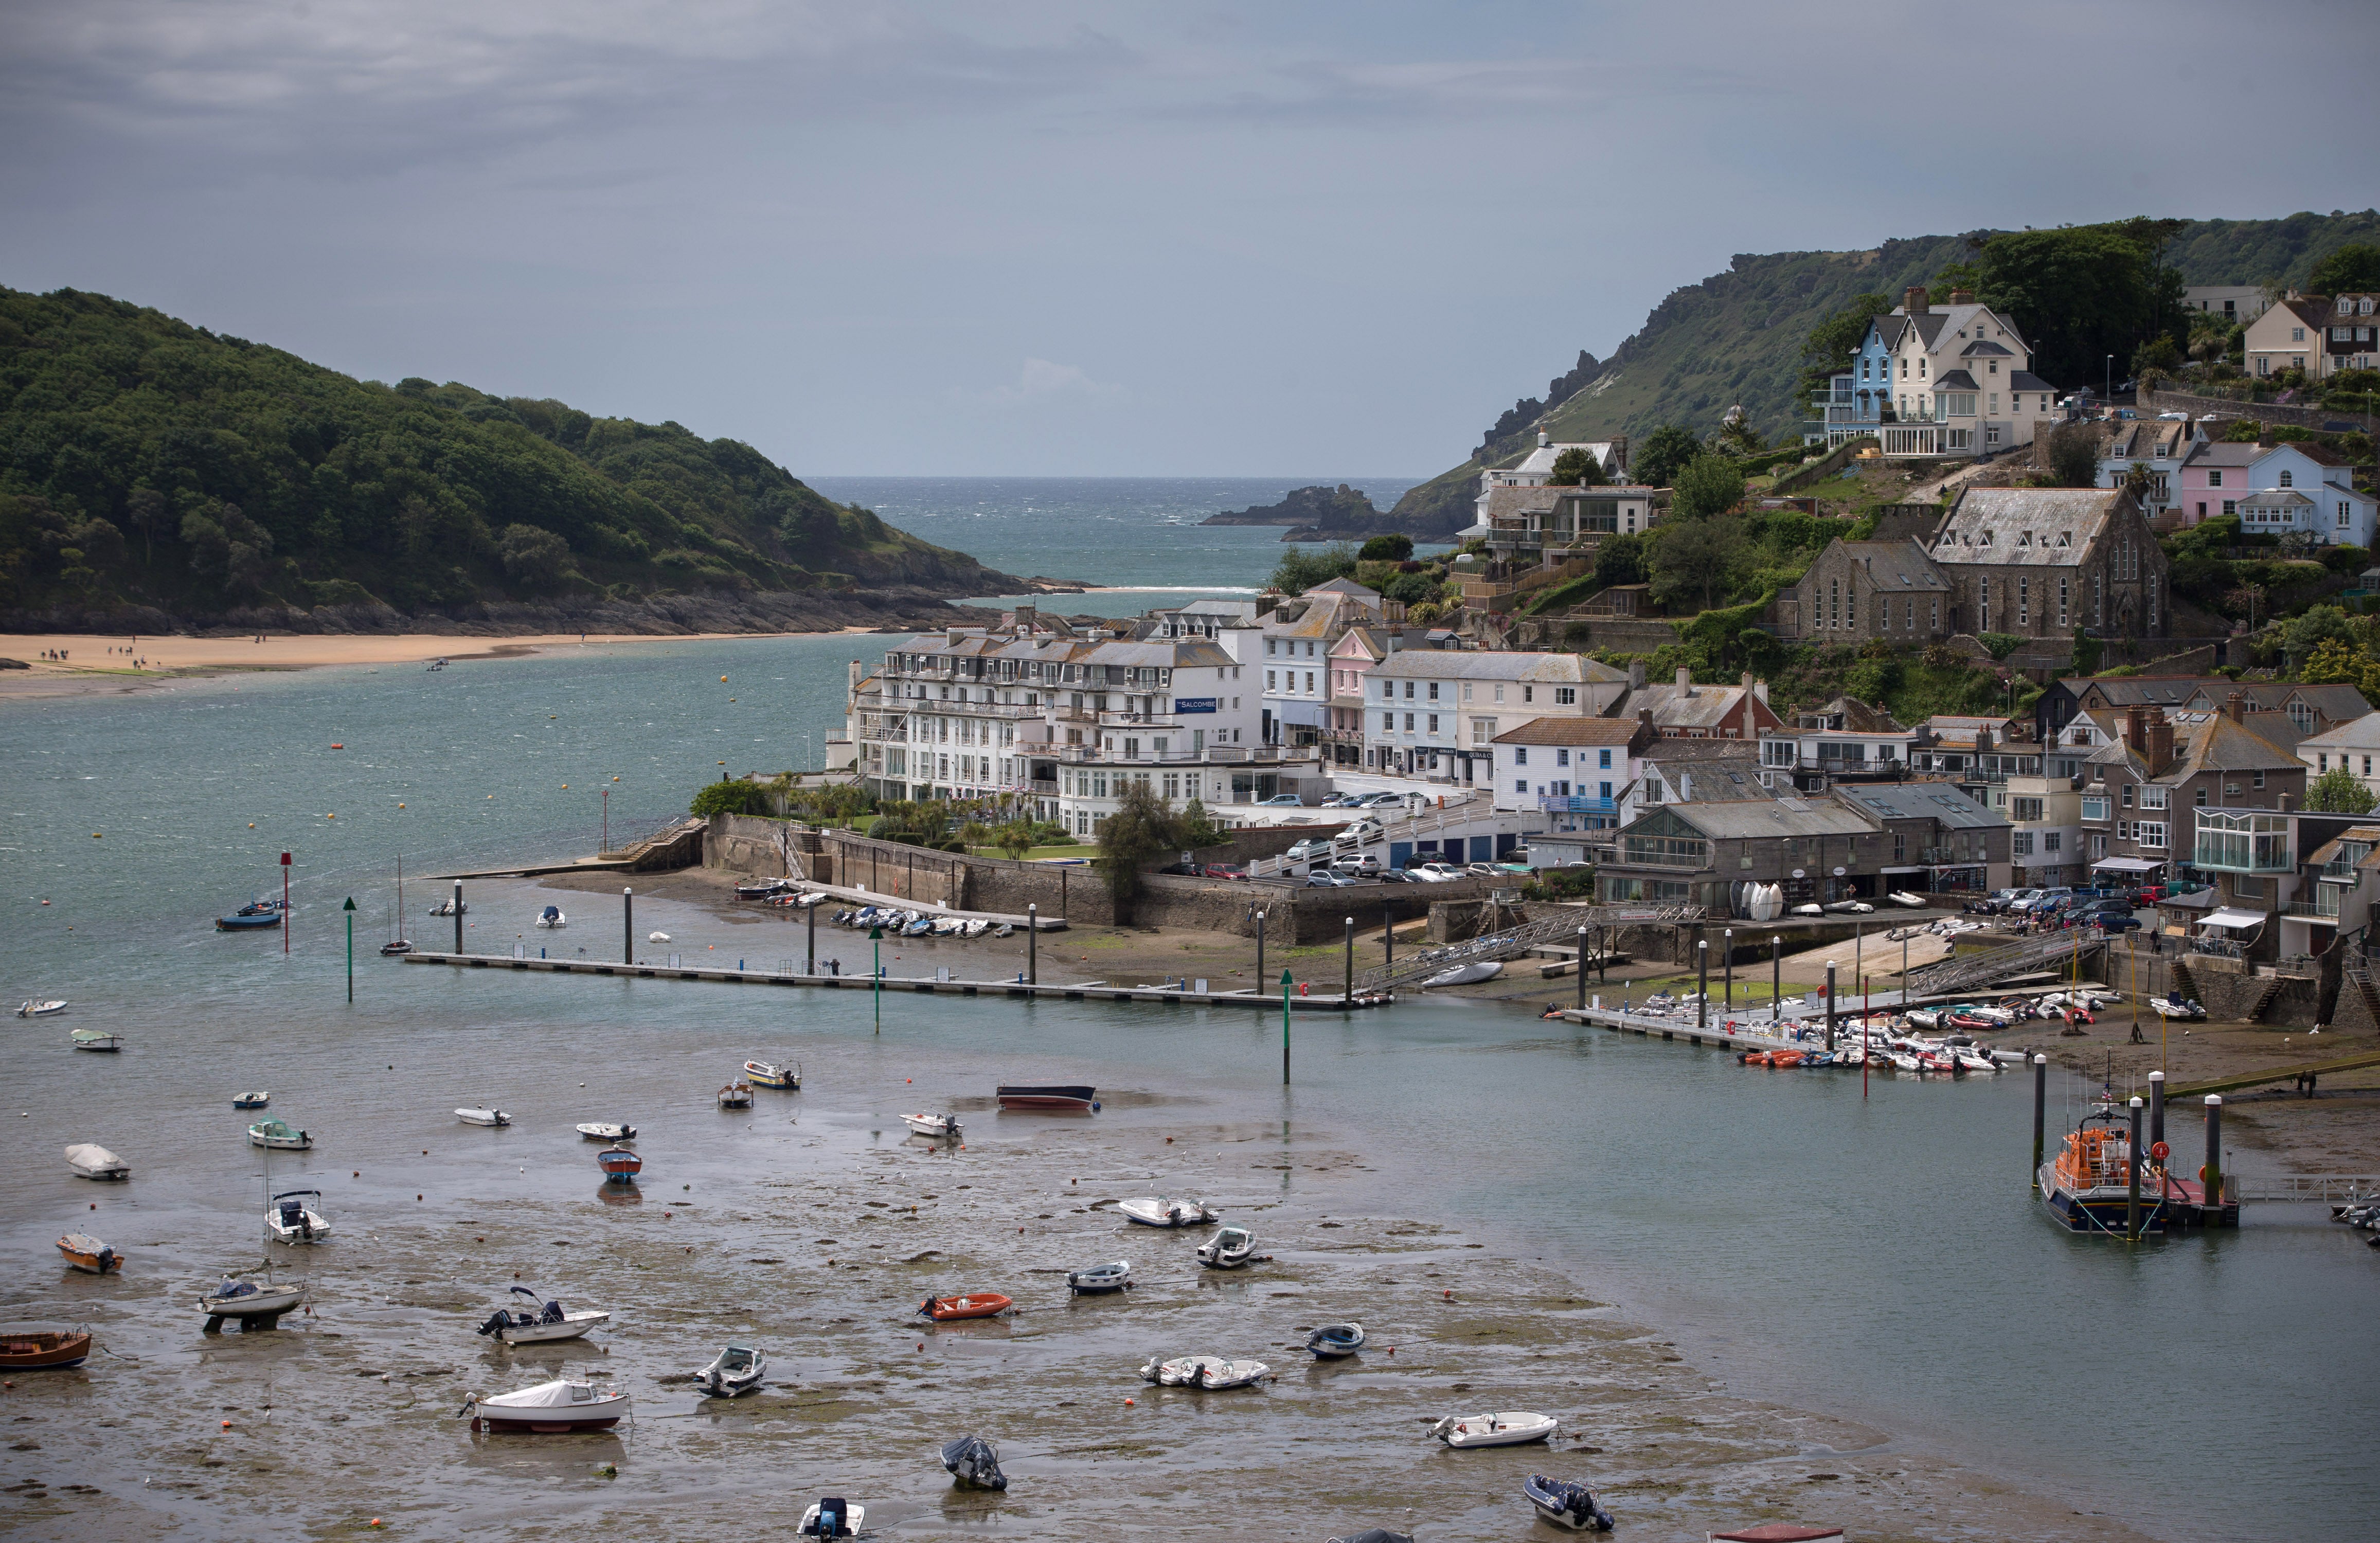 Salcombe is a popular destination for holiday makers